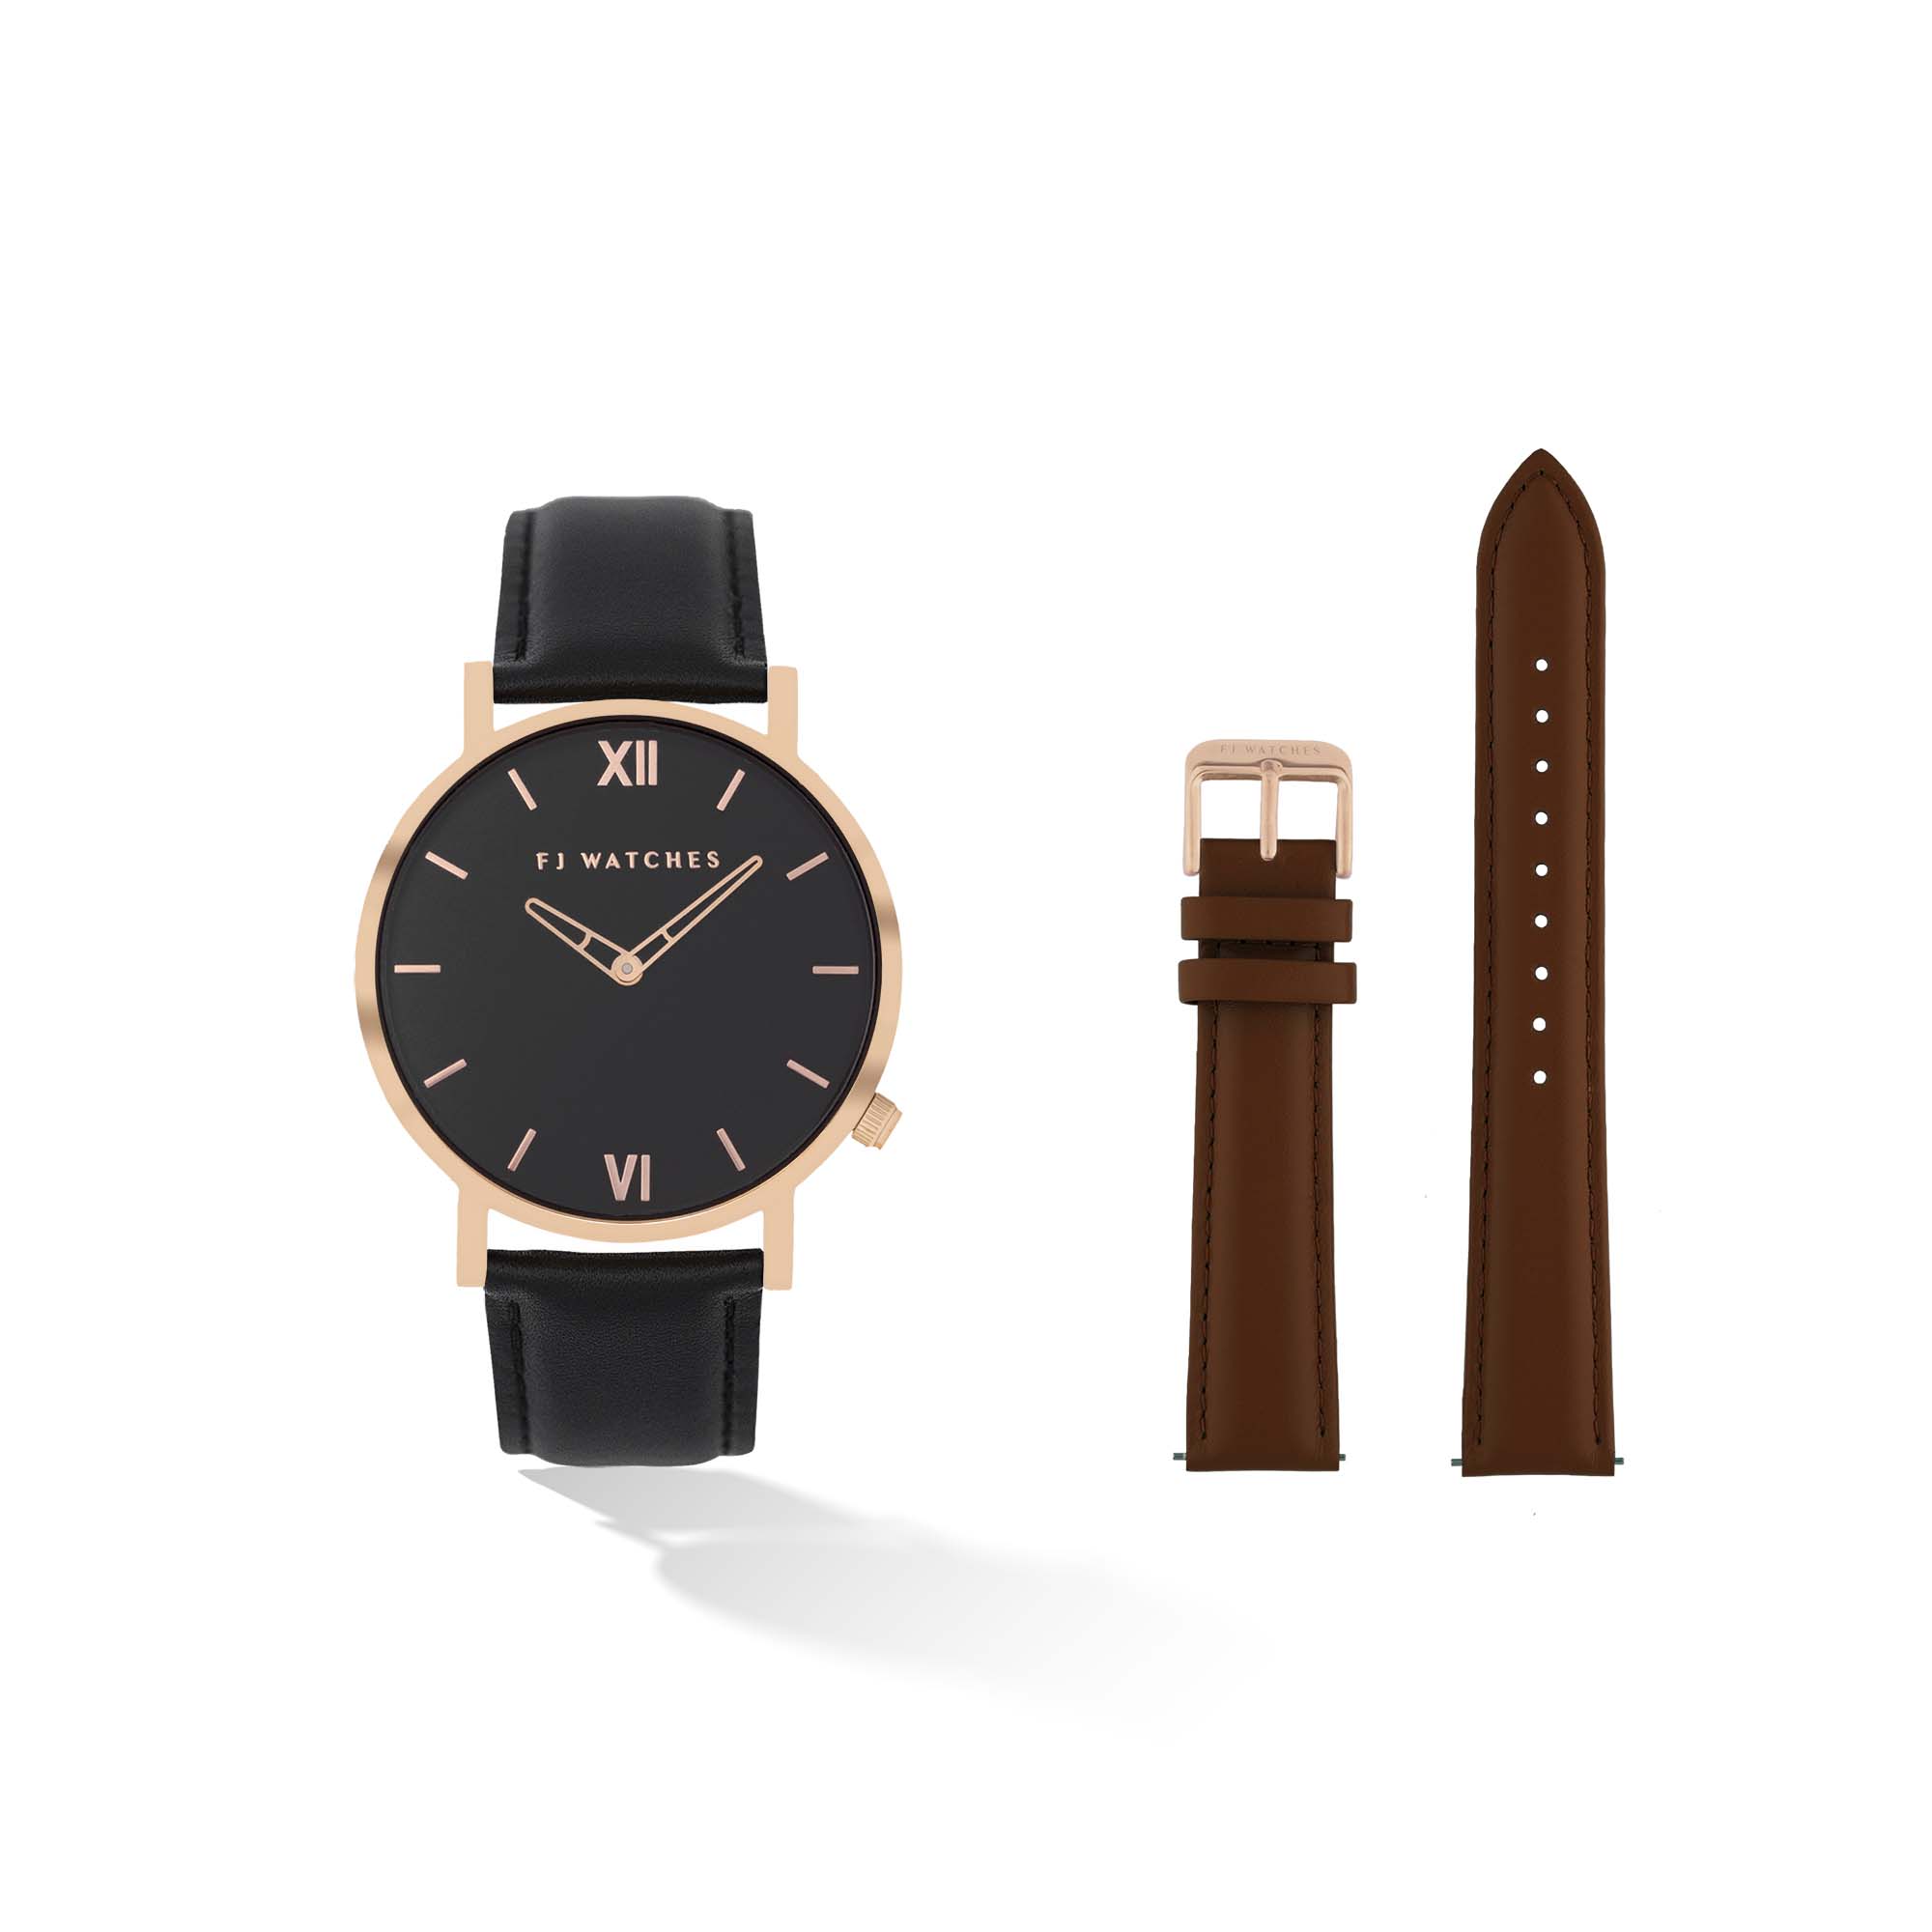 Discover the Golden Moon set, a 36mm men and women watch from Five Jwlry. Equipped with a minimalist black and rose gold dial. In this special edition, this watch comes with two leathers, one black leather and one brown. The perfect gift!